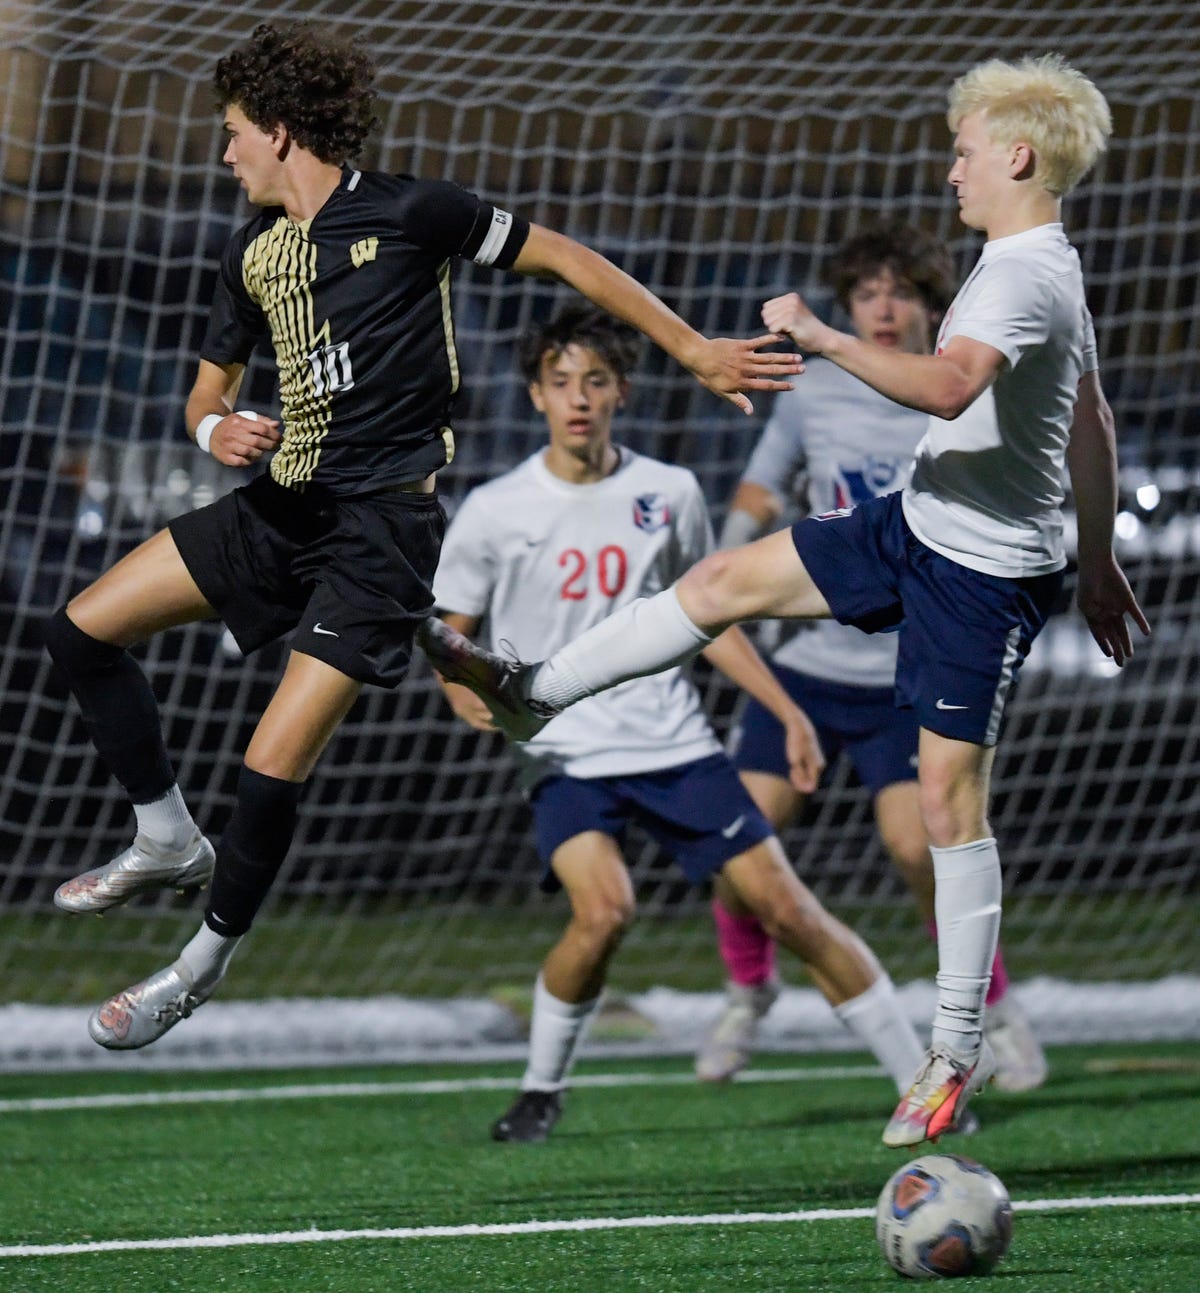 Alabama High School Soccer Playoffs: Exciting Matchups and Game Schedules Revealed for Monday and Tuesday